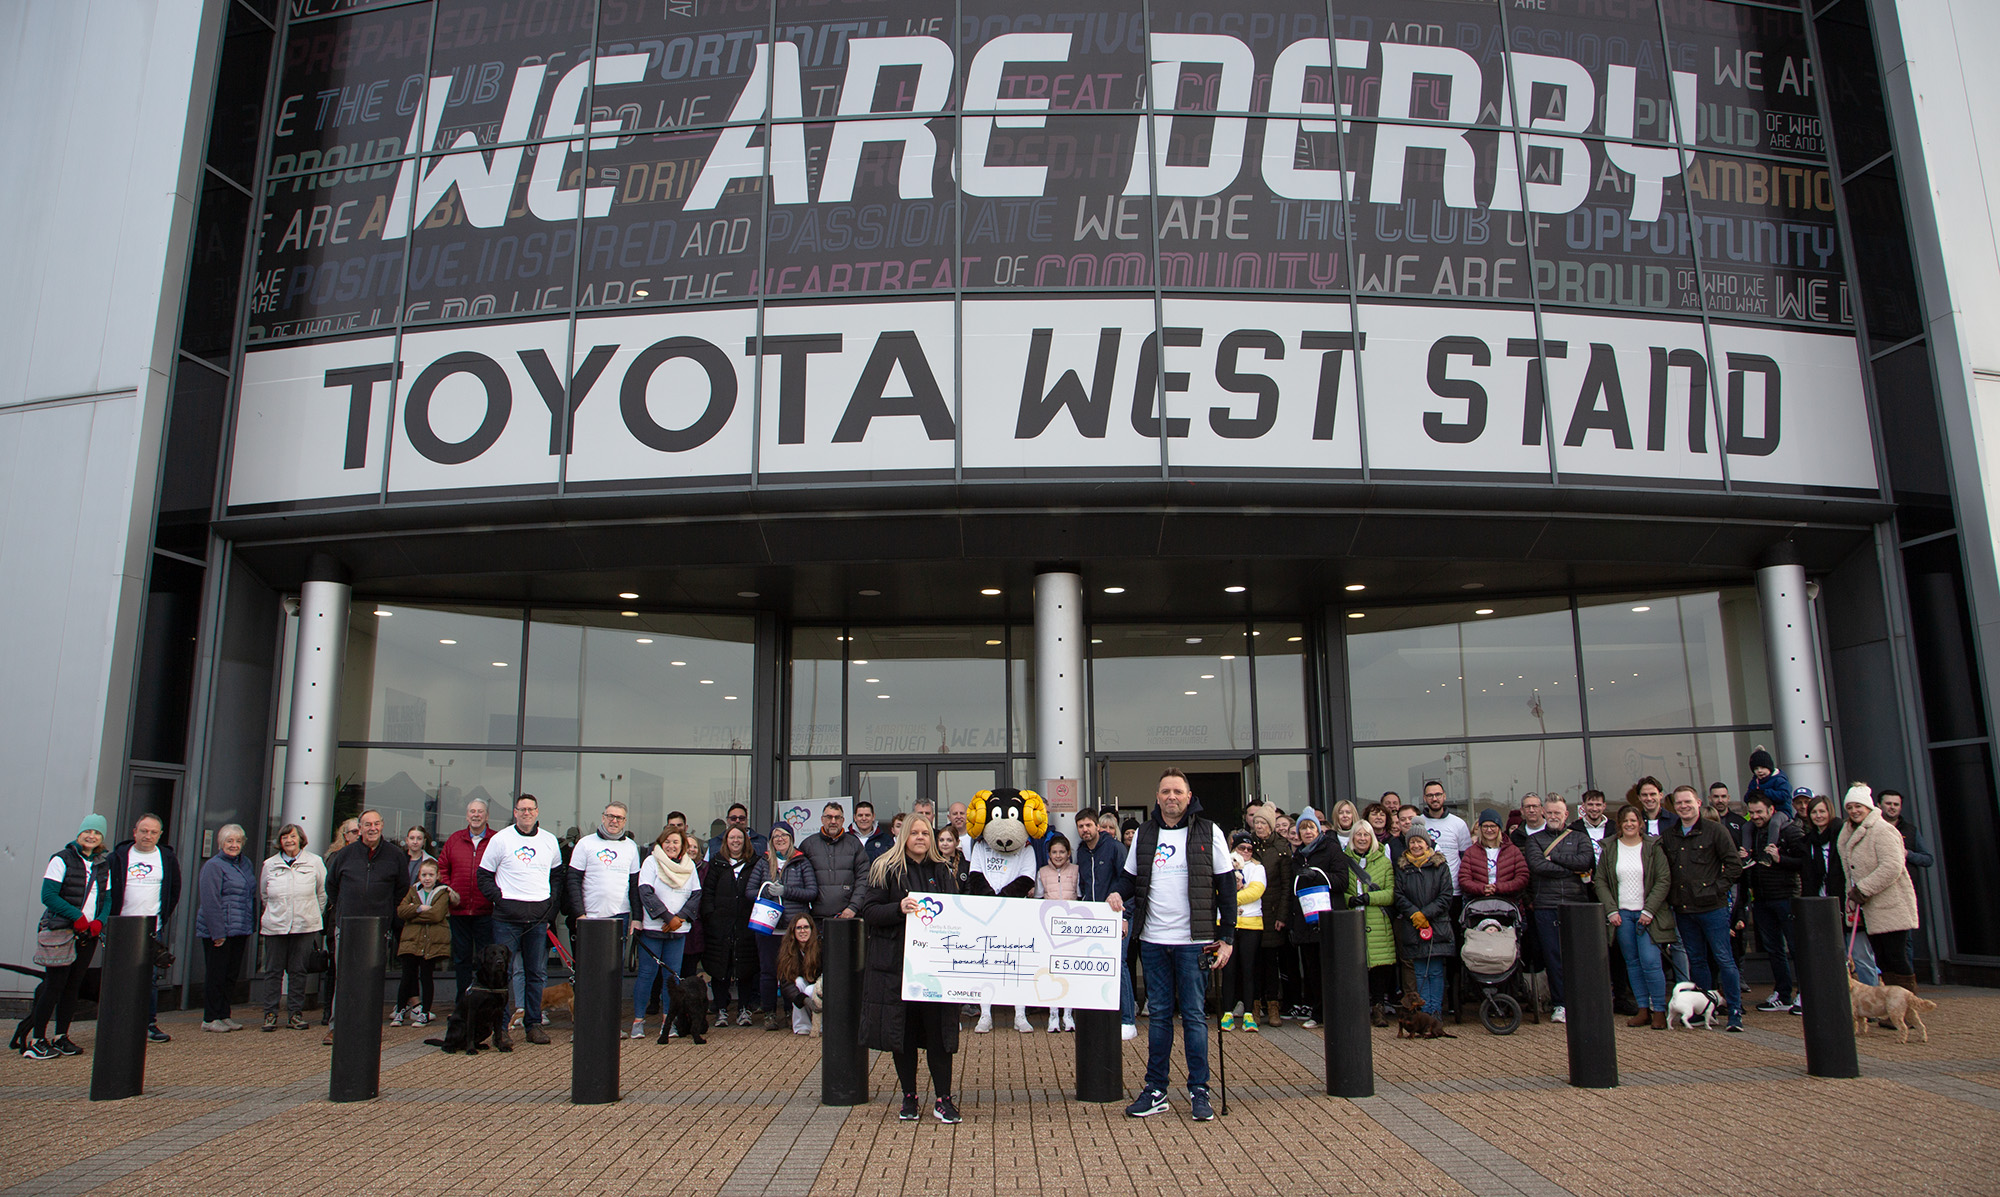 Group of people stood in front of Derby County Football stadium holding a cheque.